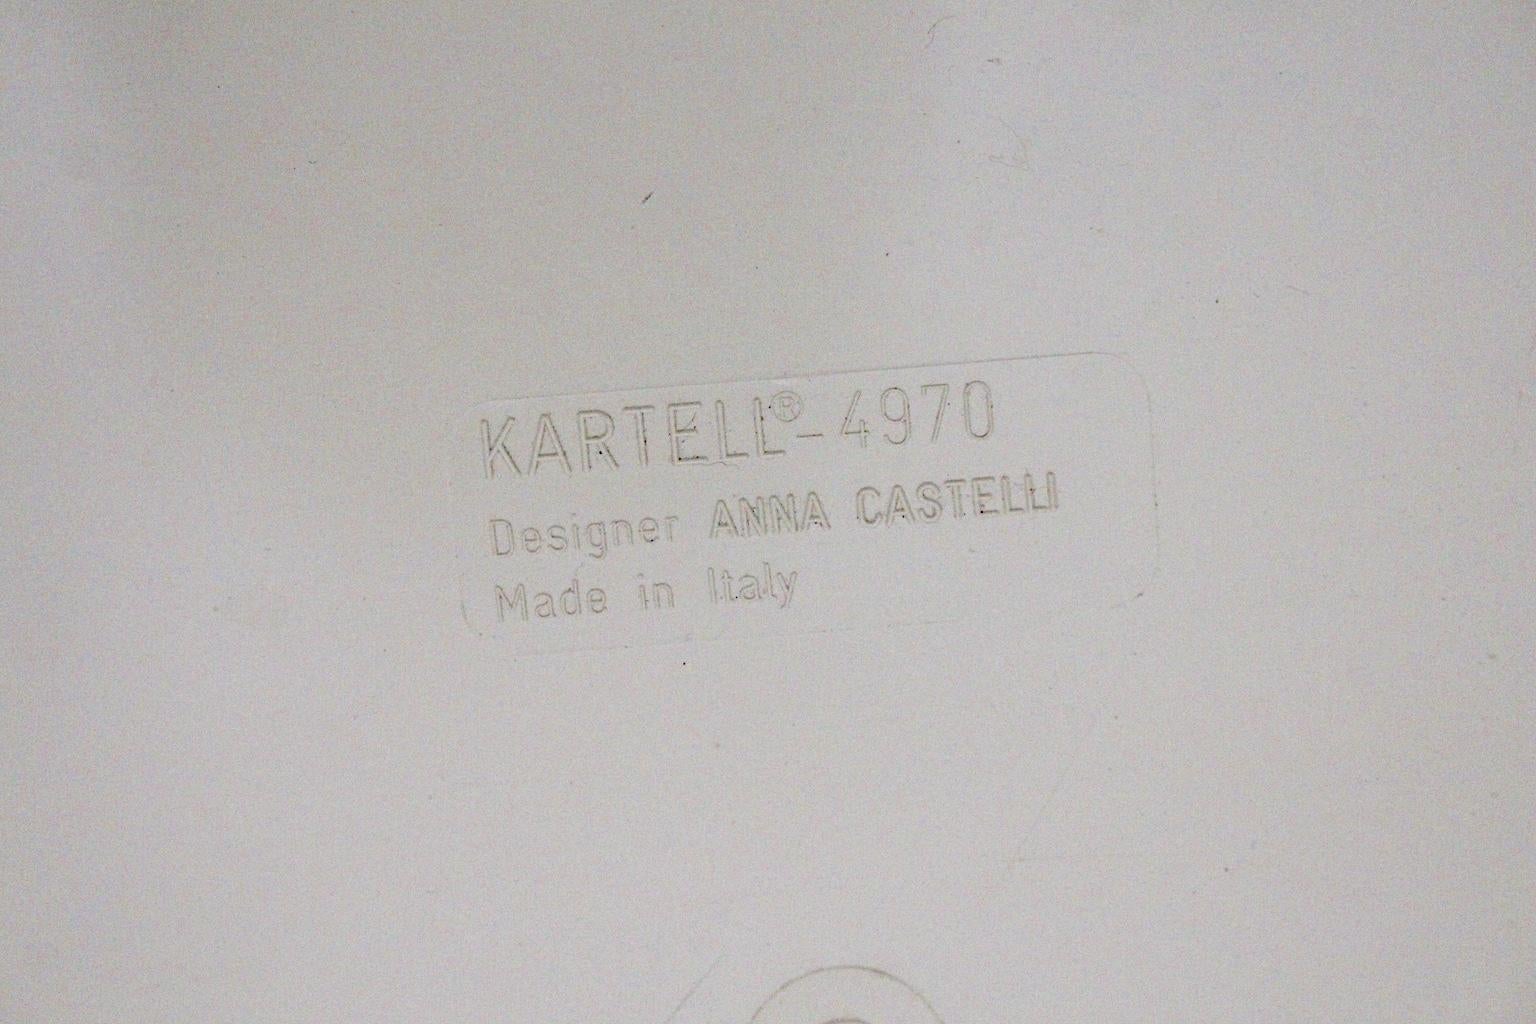 Space Age vintage ivory white plastic bar cart / trolley or chest designed by Anna Castelli Ferrieri for Kartell Italy 1970s,
stamped Kartell 4970. Design Anna Castelli Ferrieri Made in Italy
A wonderful bar cart from the space age period with 3